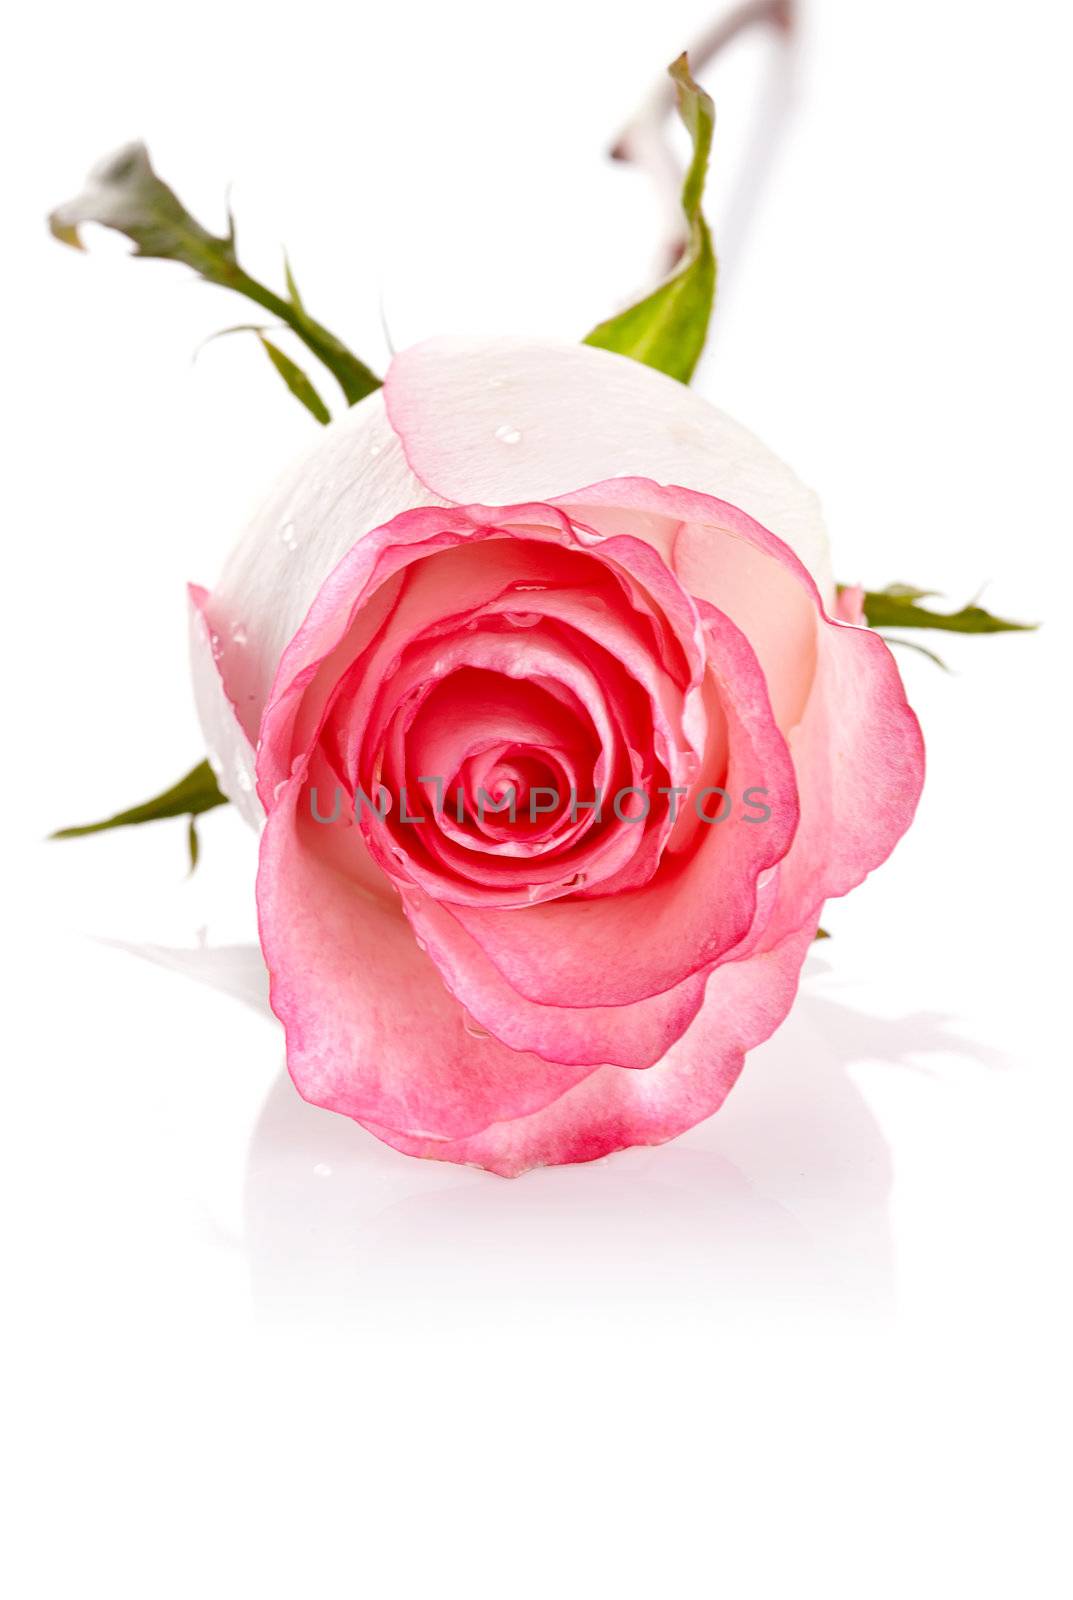 Pink rose. Rose on a white background. Pink flower.